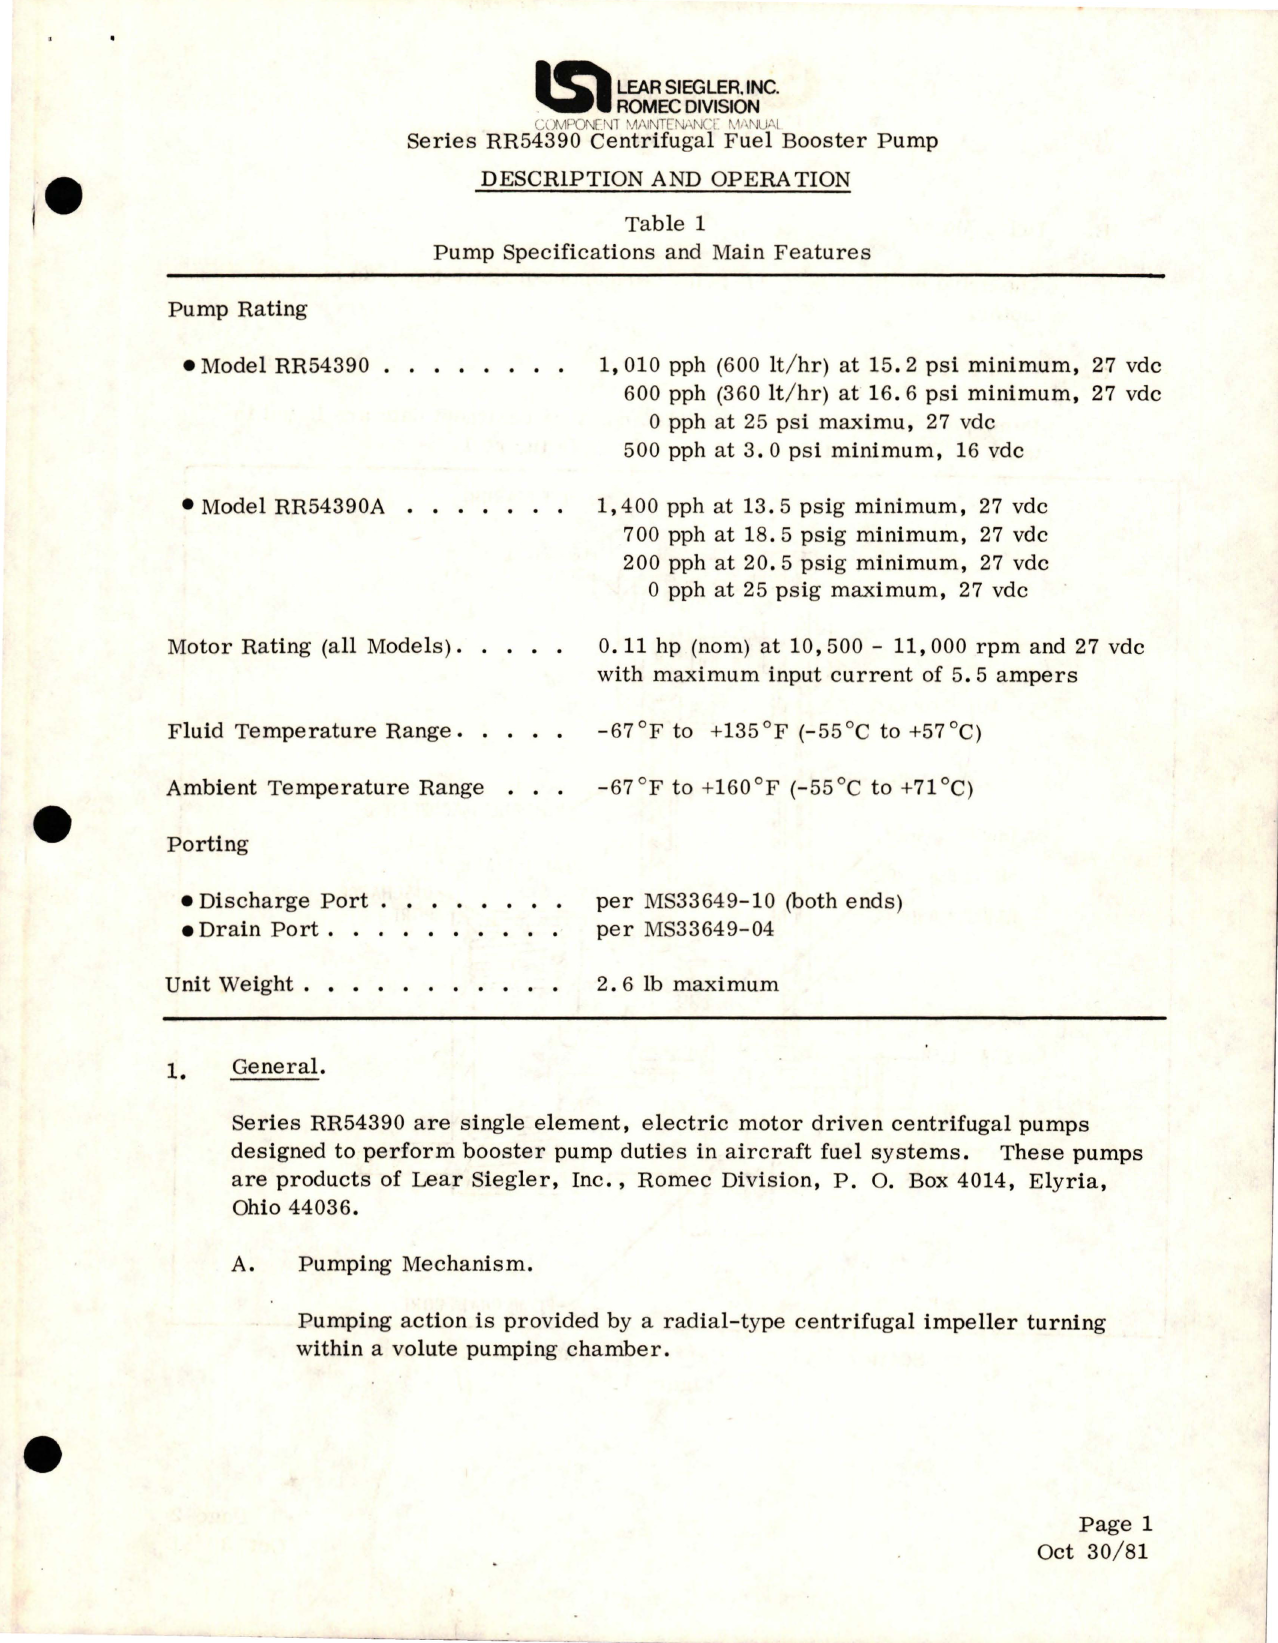 Sample page 5 from AirCorps Library document: Maintenance Manual for Centrifugal Fuel Booster Pump - Series RR54390